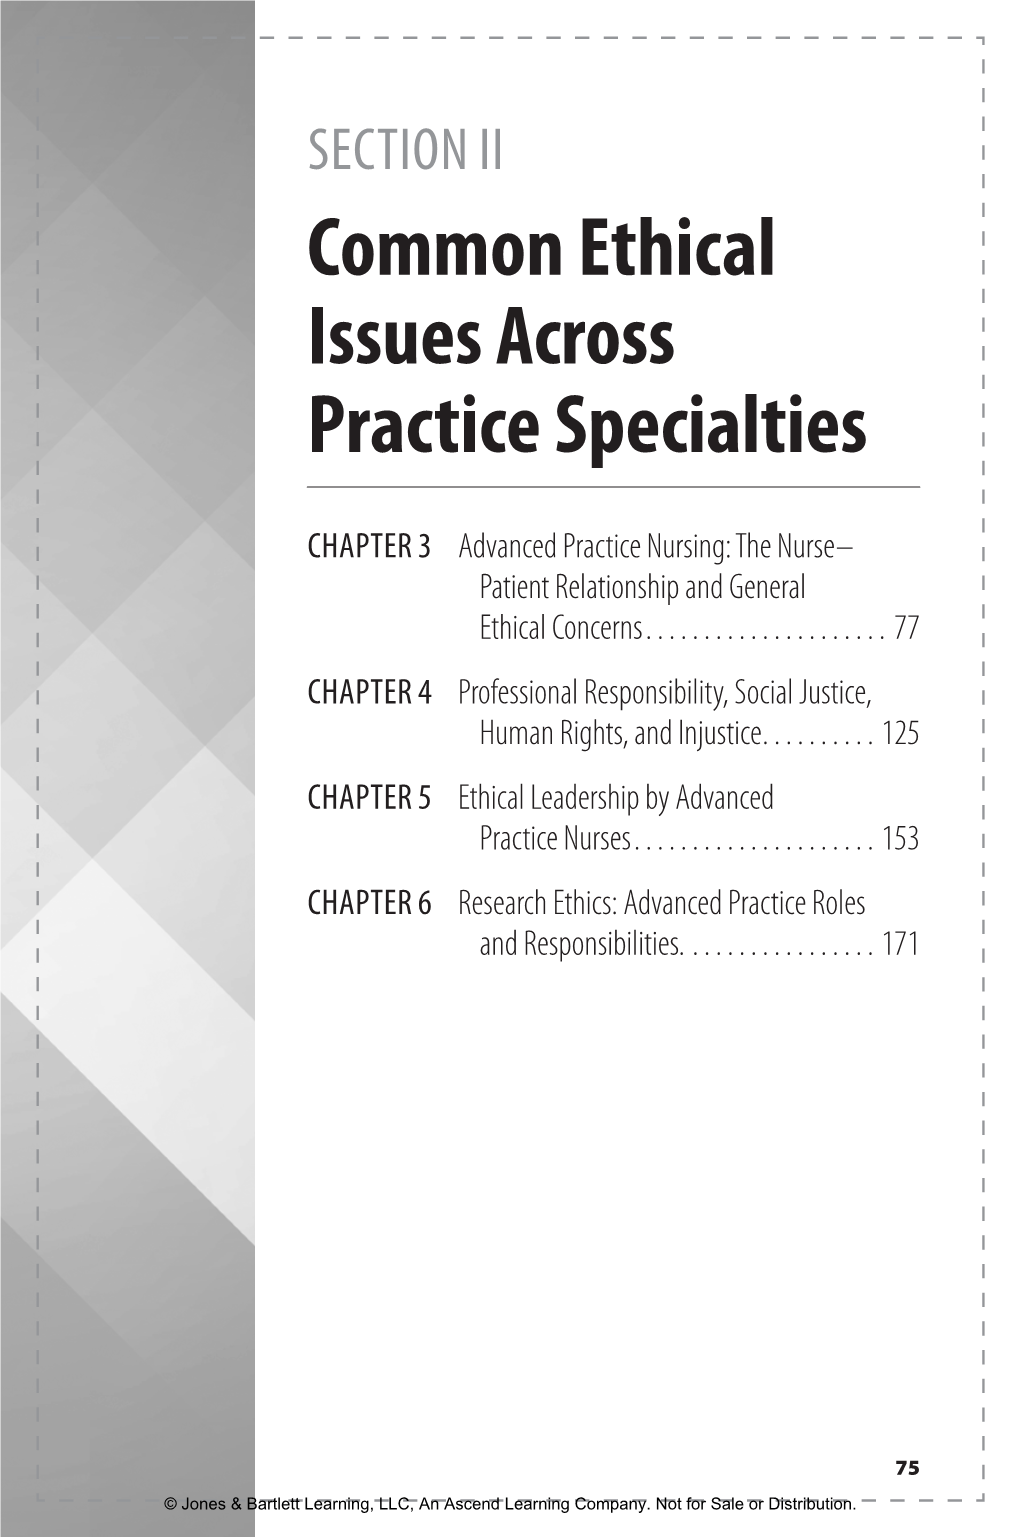 Common Ethical Issues Across Practice Specialties